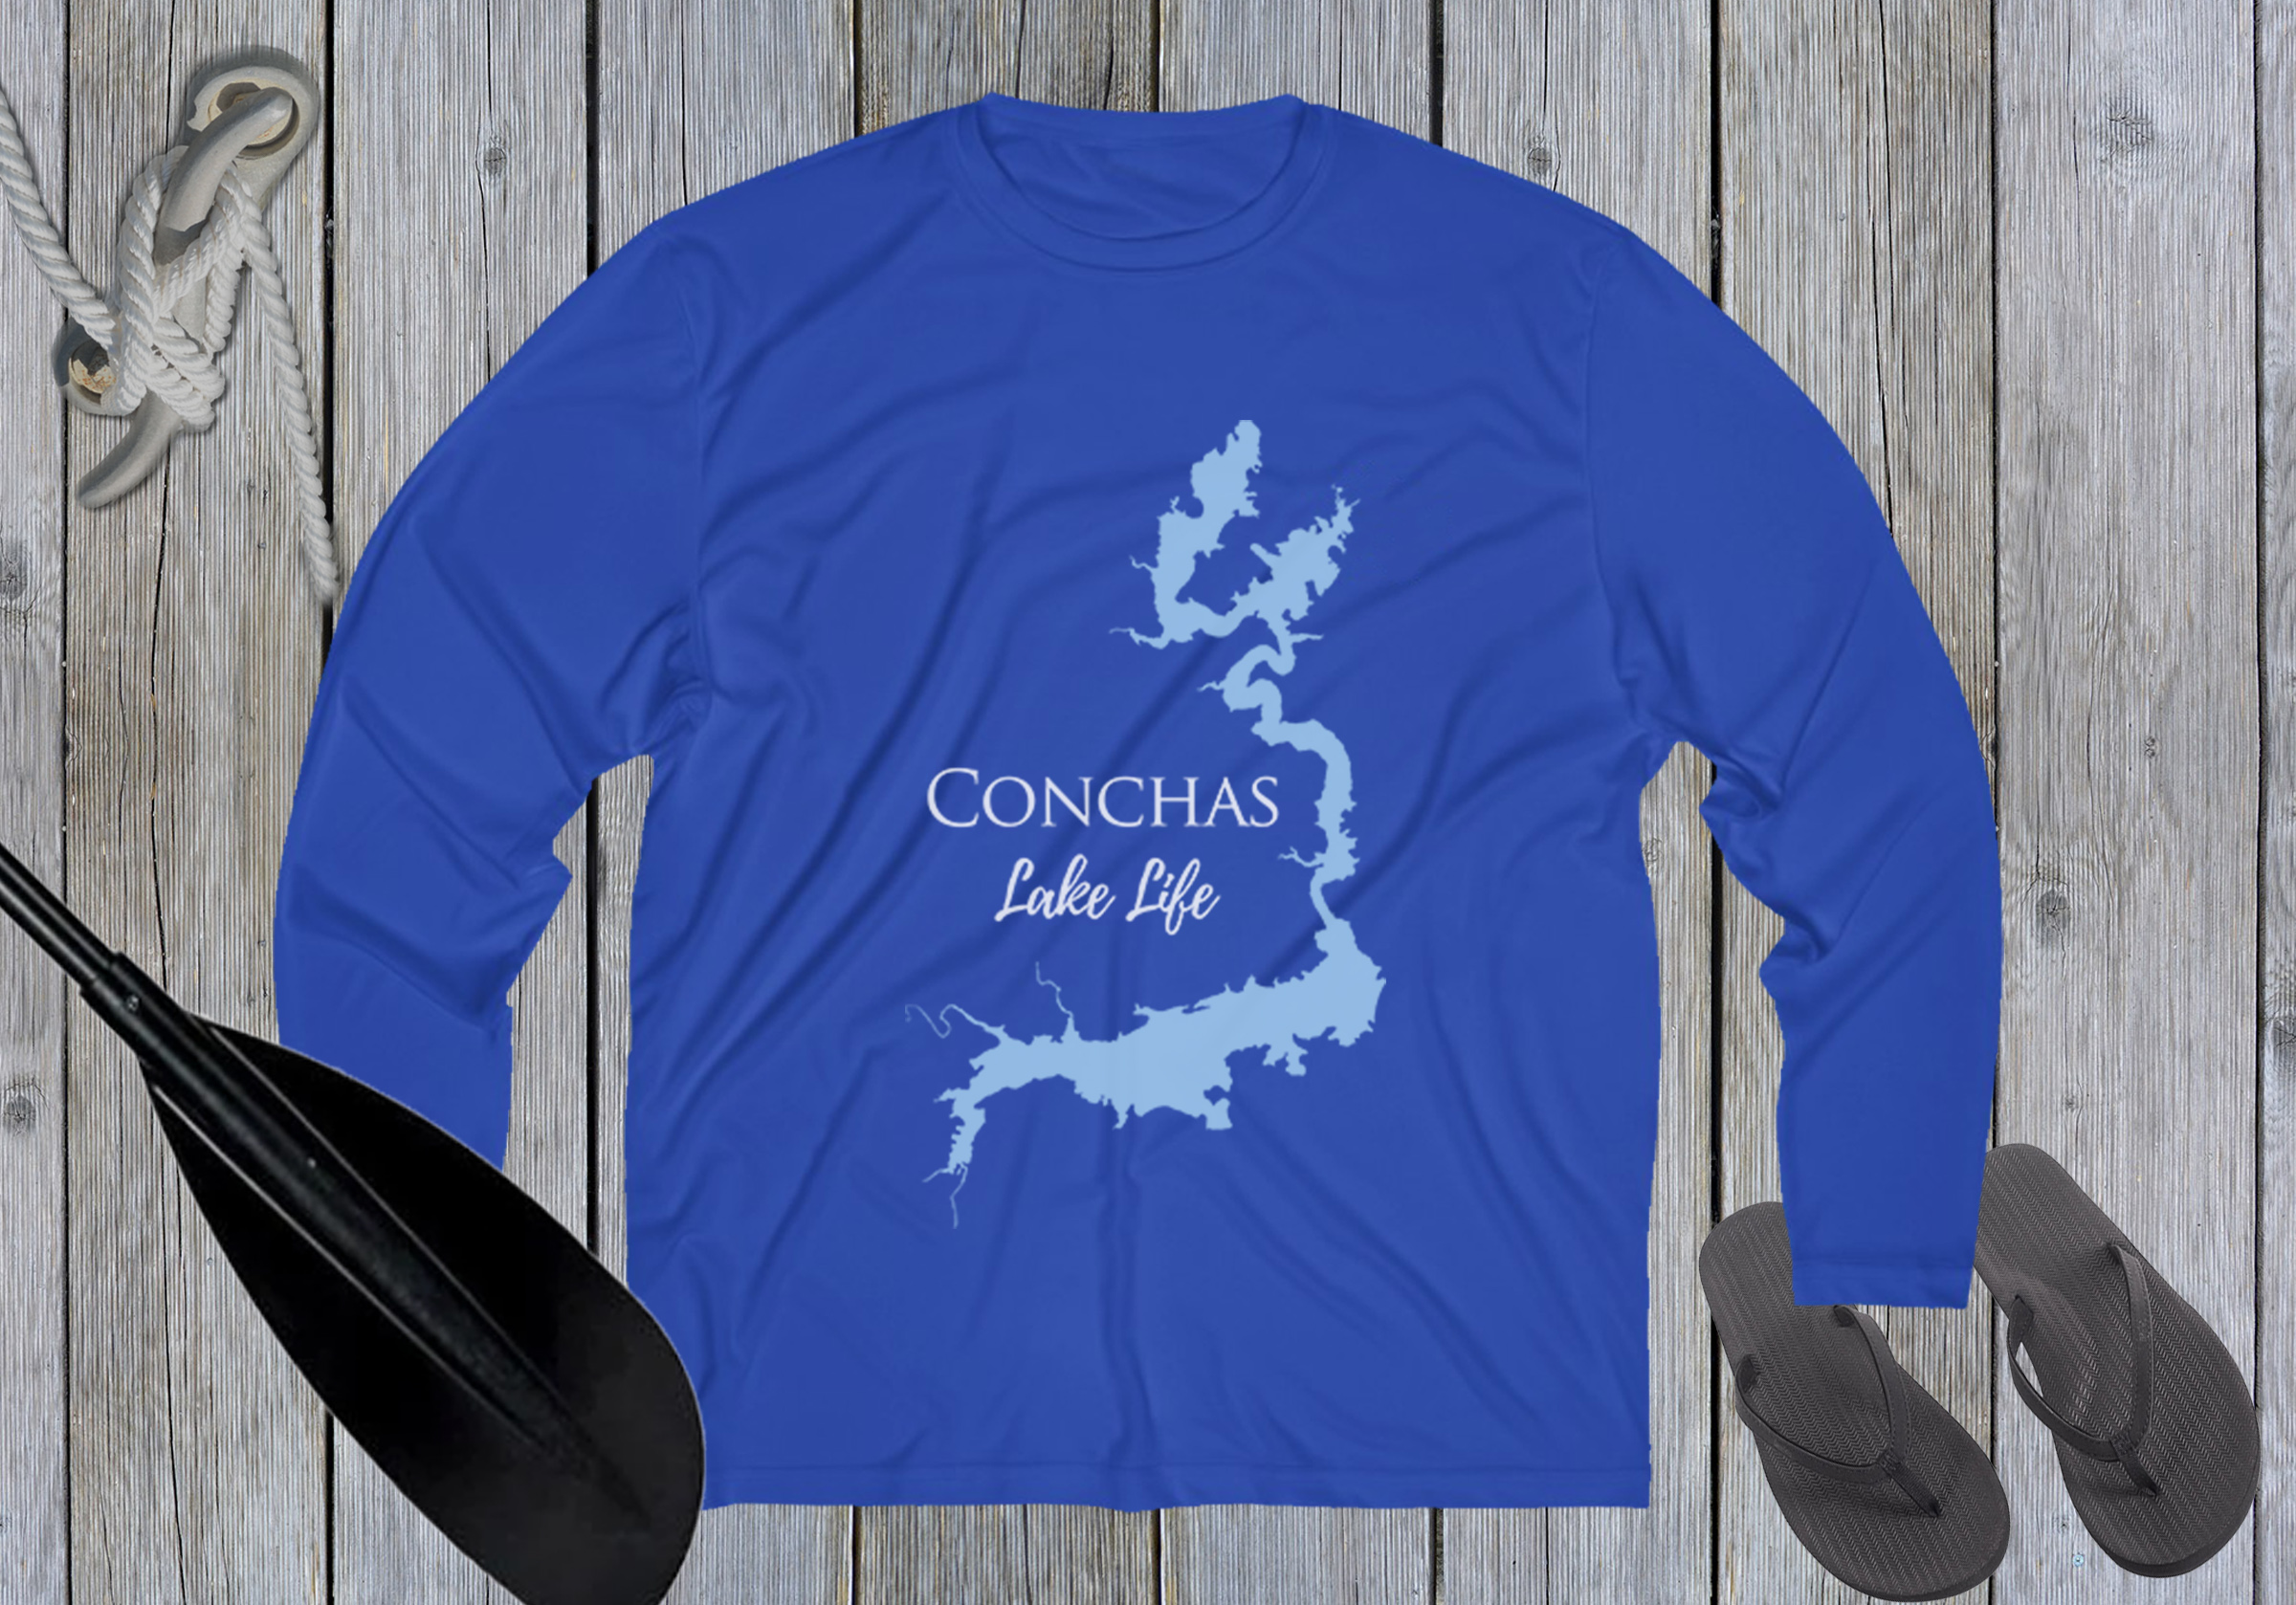 Conchas Lake Life Dri-fit Boating Shirt - Breathable Material- Men's Long Sleeve Moisture Wicking Tee - New Mexico Lake